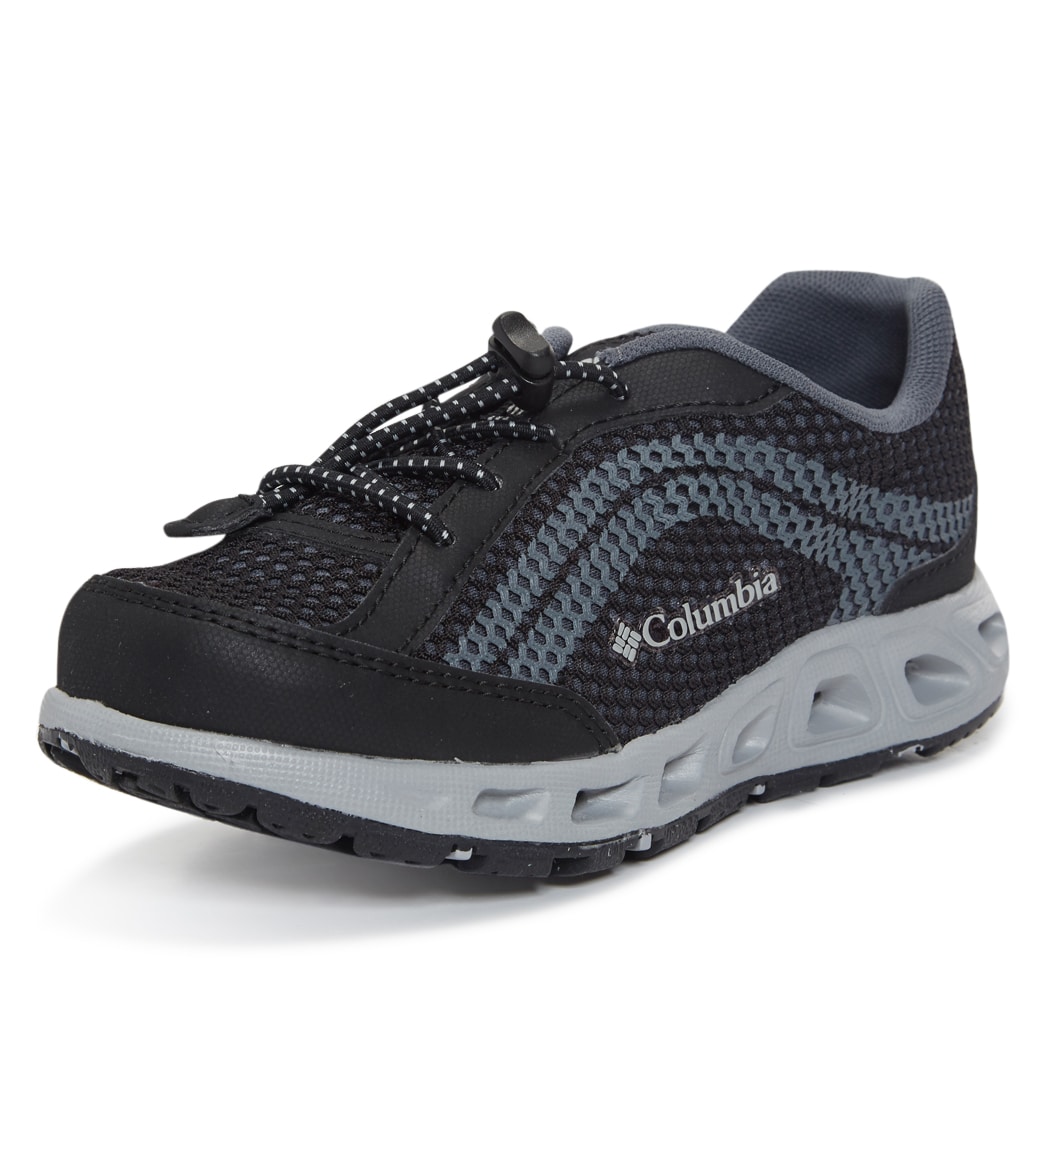 Columbia Youth Drainmaker Iv Water Shoe - Black 1 - Swimoutlet.com